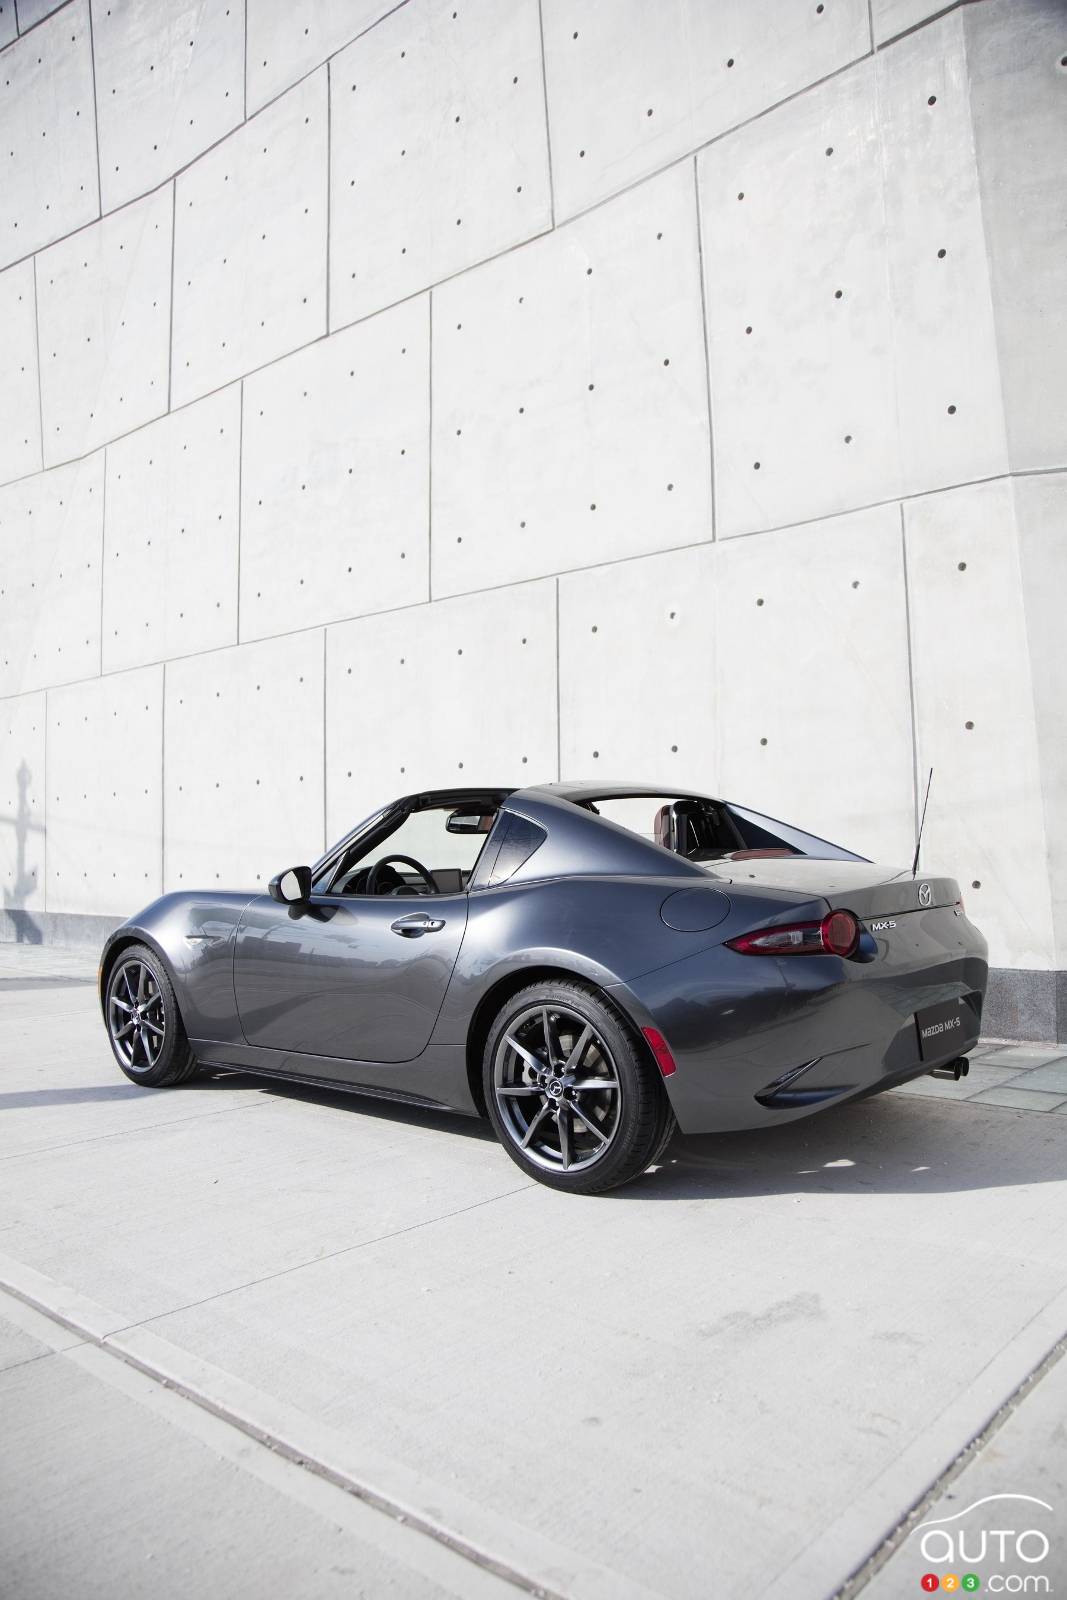 Mazda Offers Car Buyers Chance to Pre-Order 2017 MX-5 RF